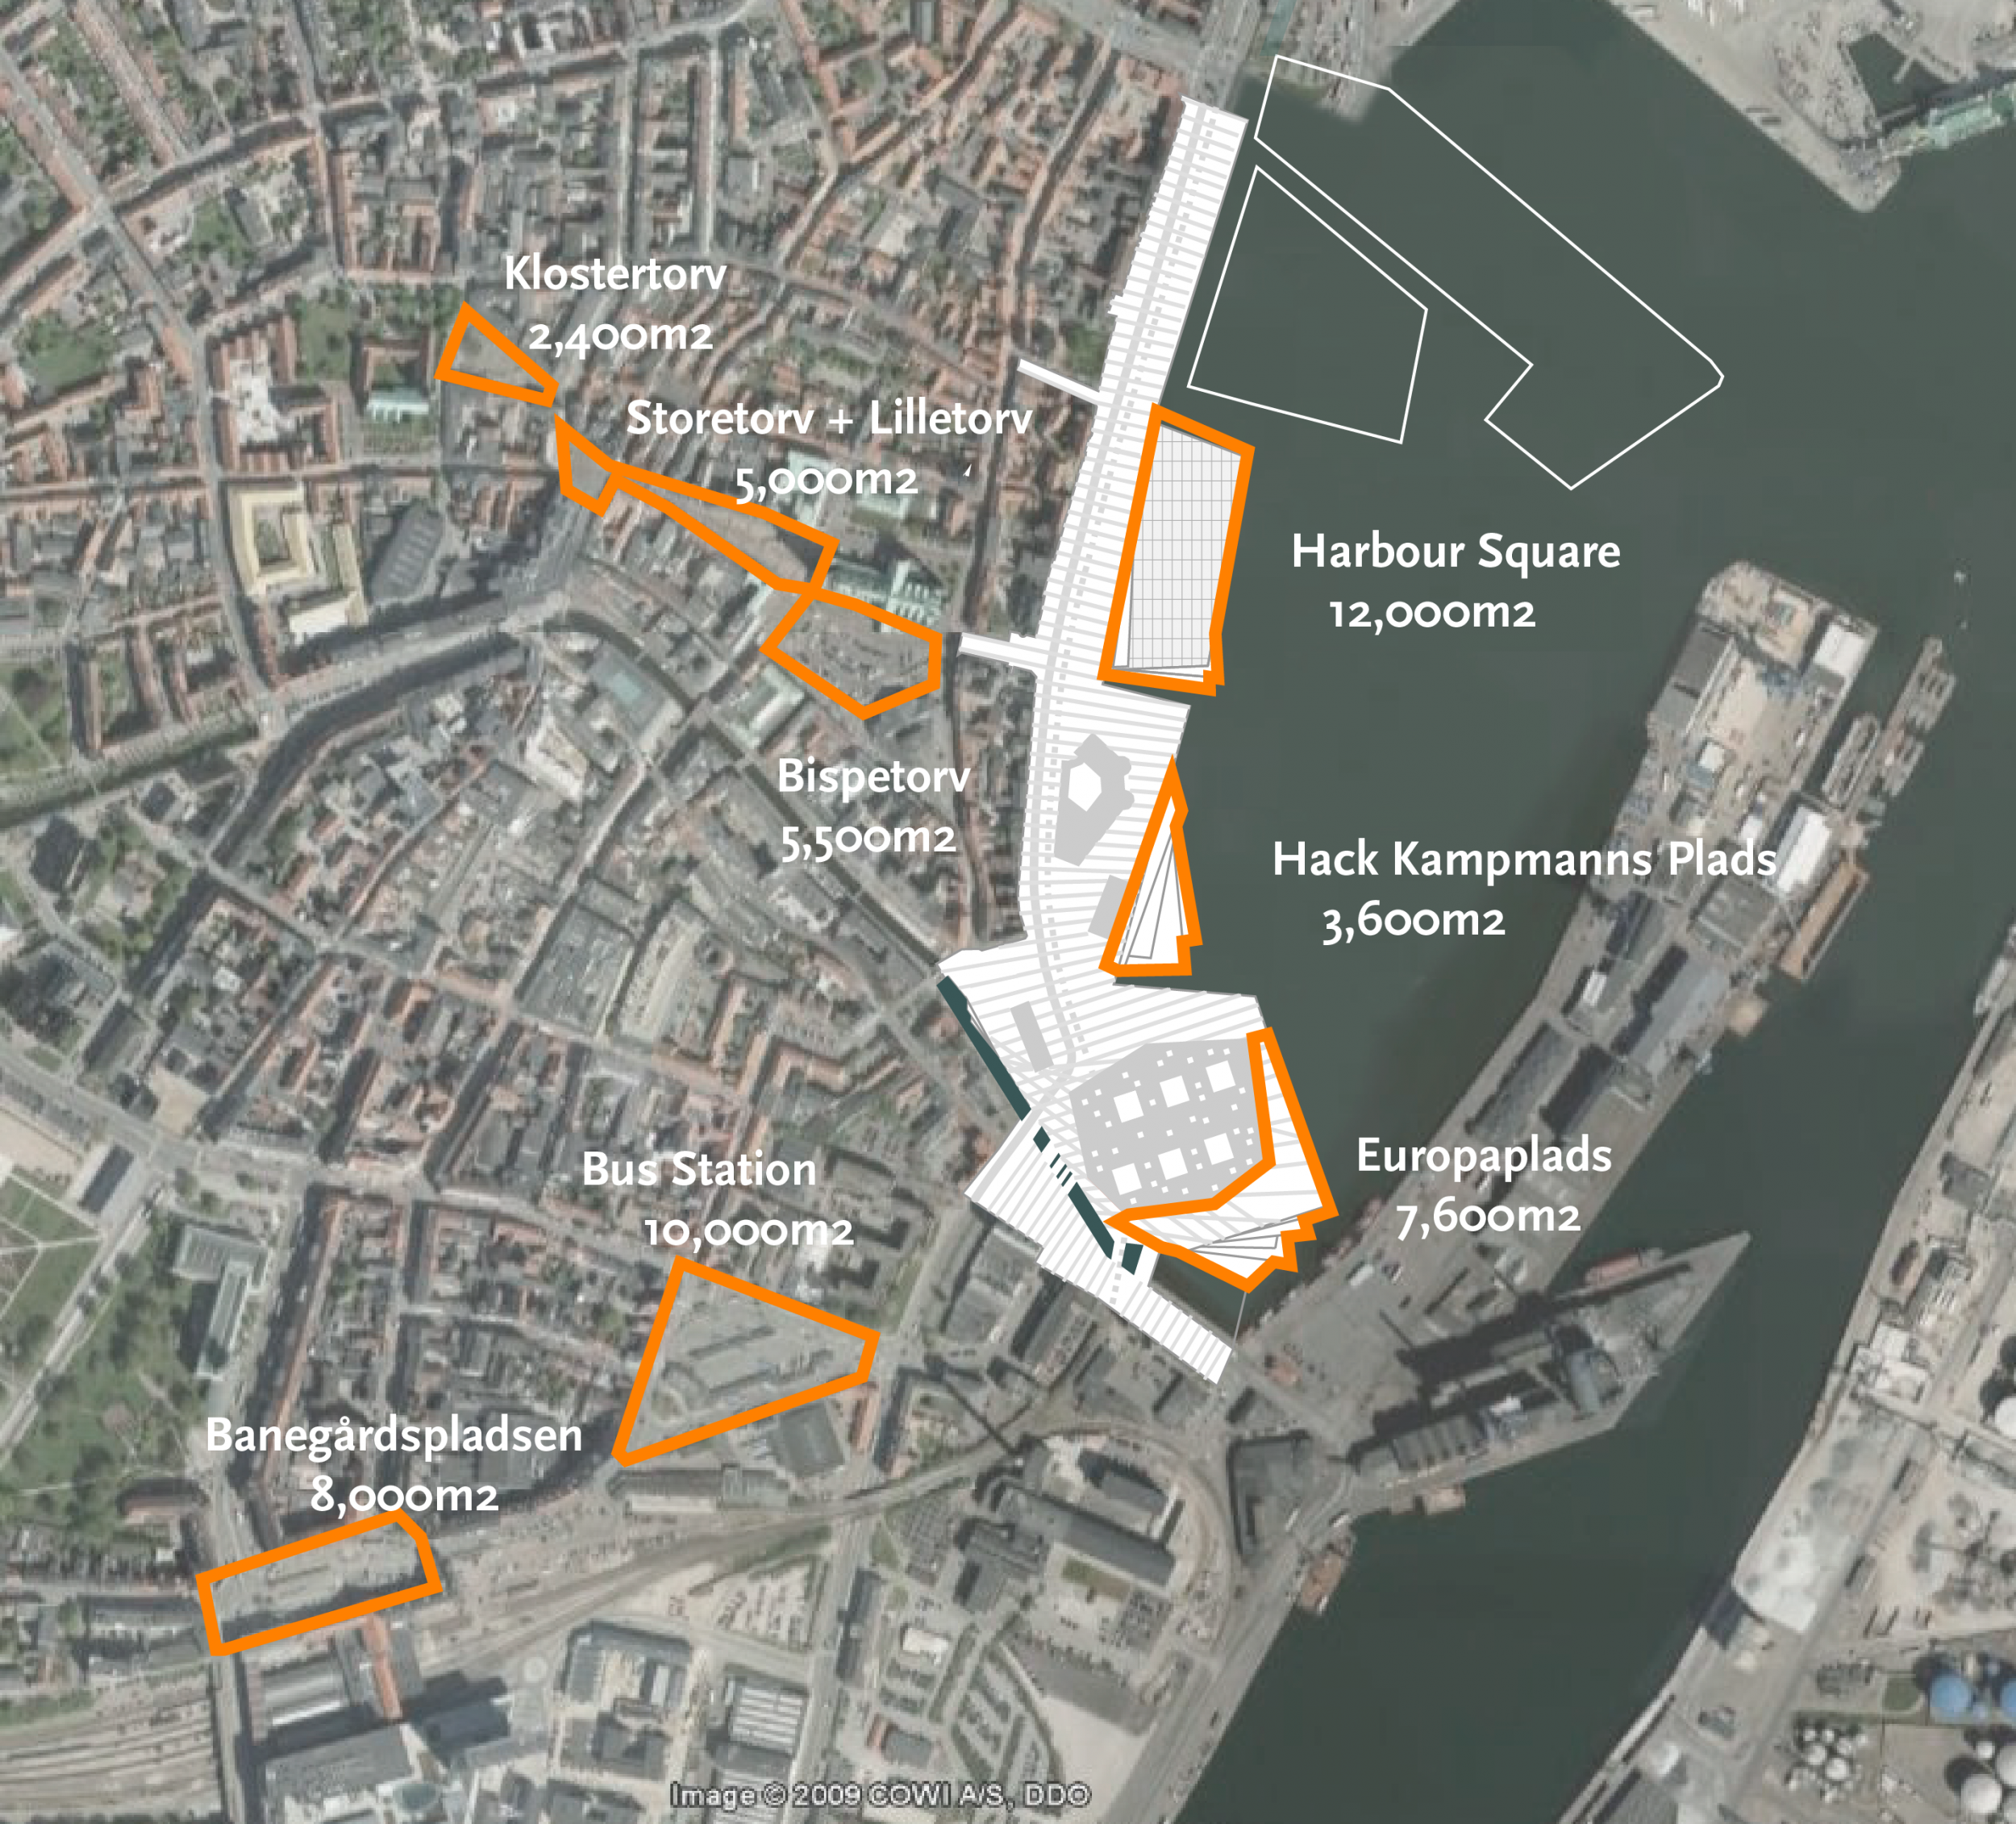 Size of waterfront spaces compared to other spaces in Aarhus